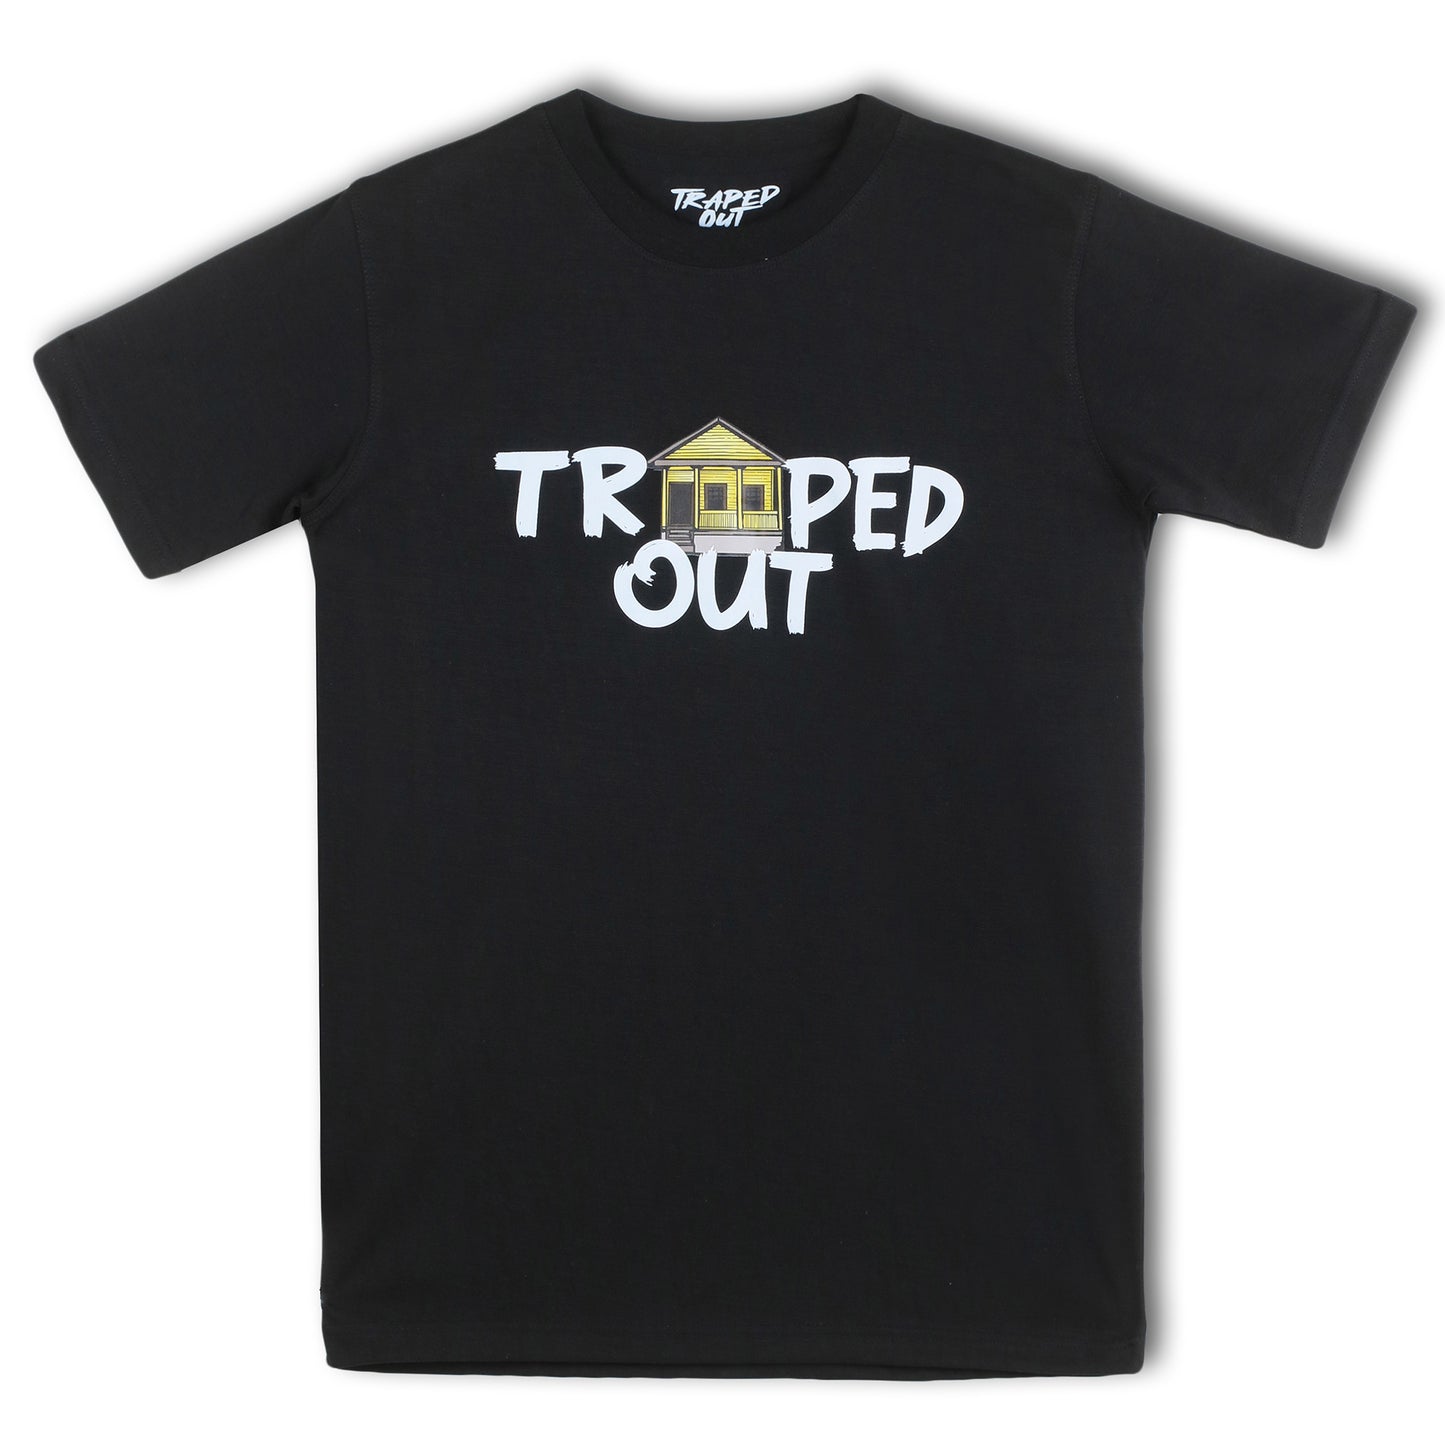 Black & White Trapped Out Tee